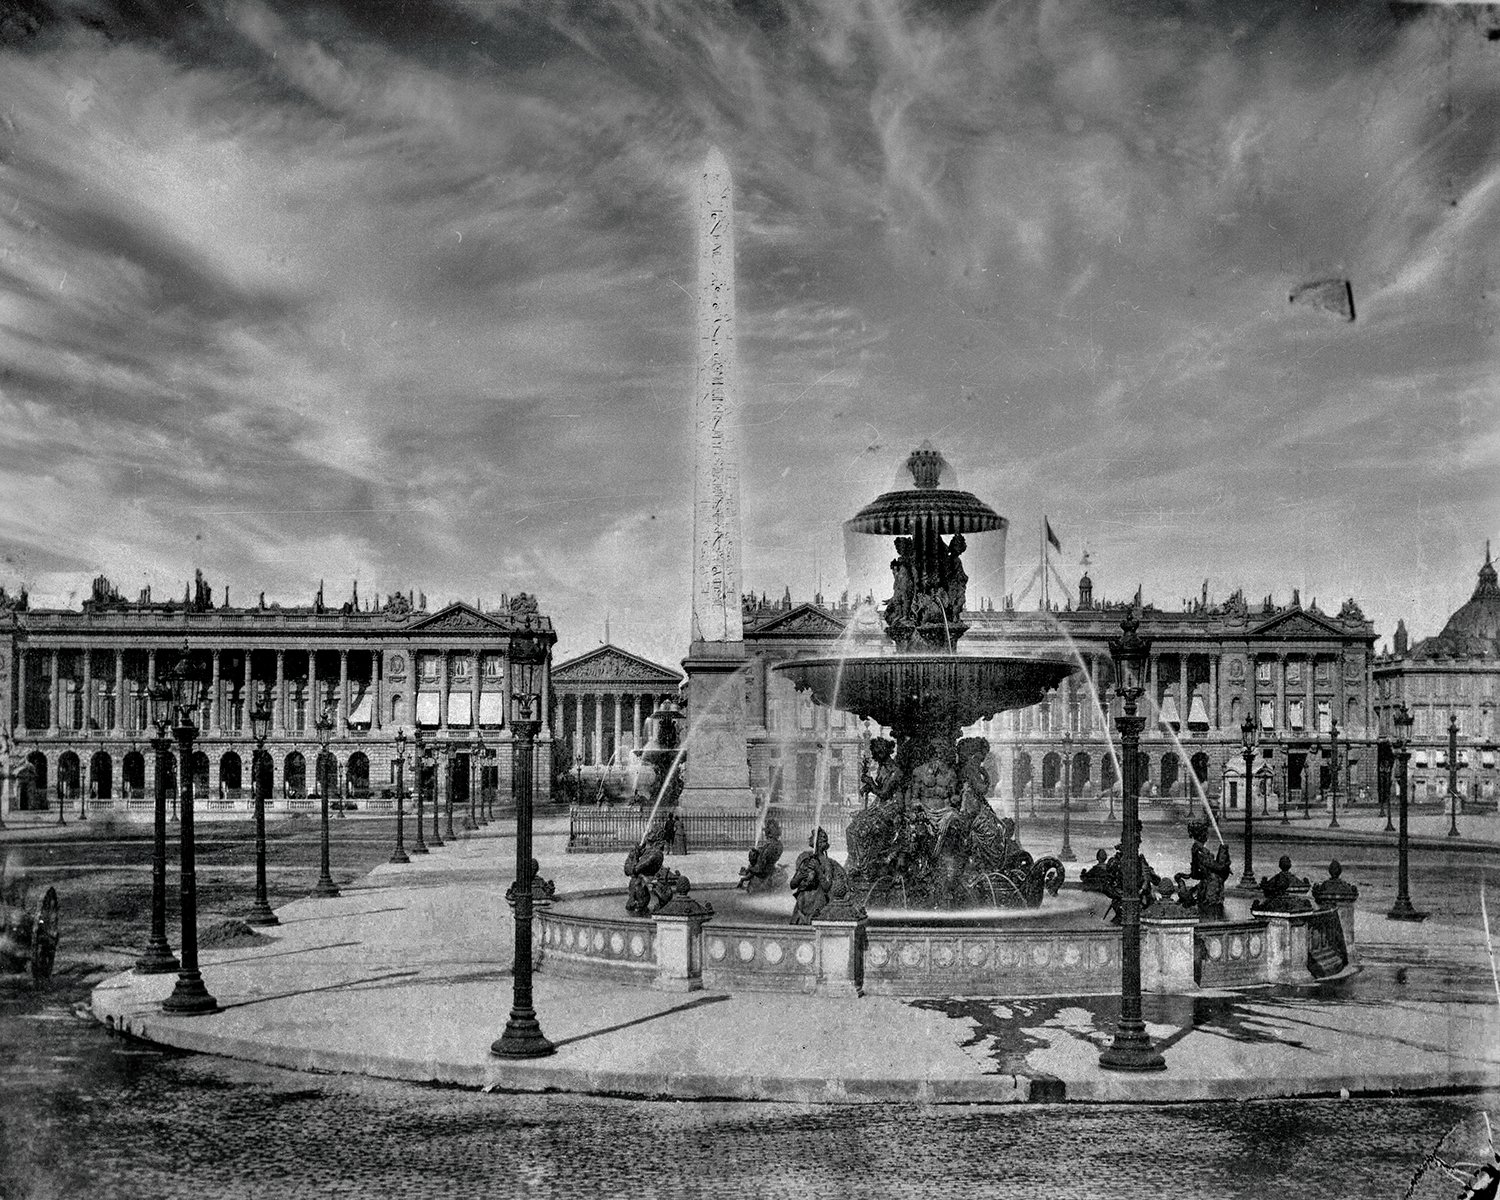 Revisiting Places Series the City of Paris Place de la Concorde in France Dry Plate Photo Manipulation by Pierre Toutain-Dorbec.jpg